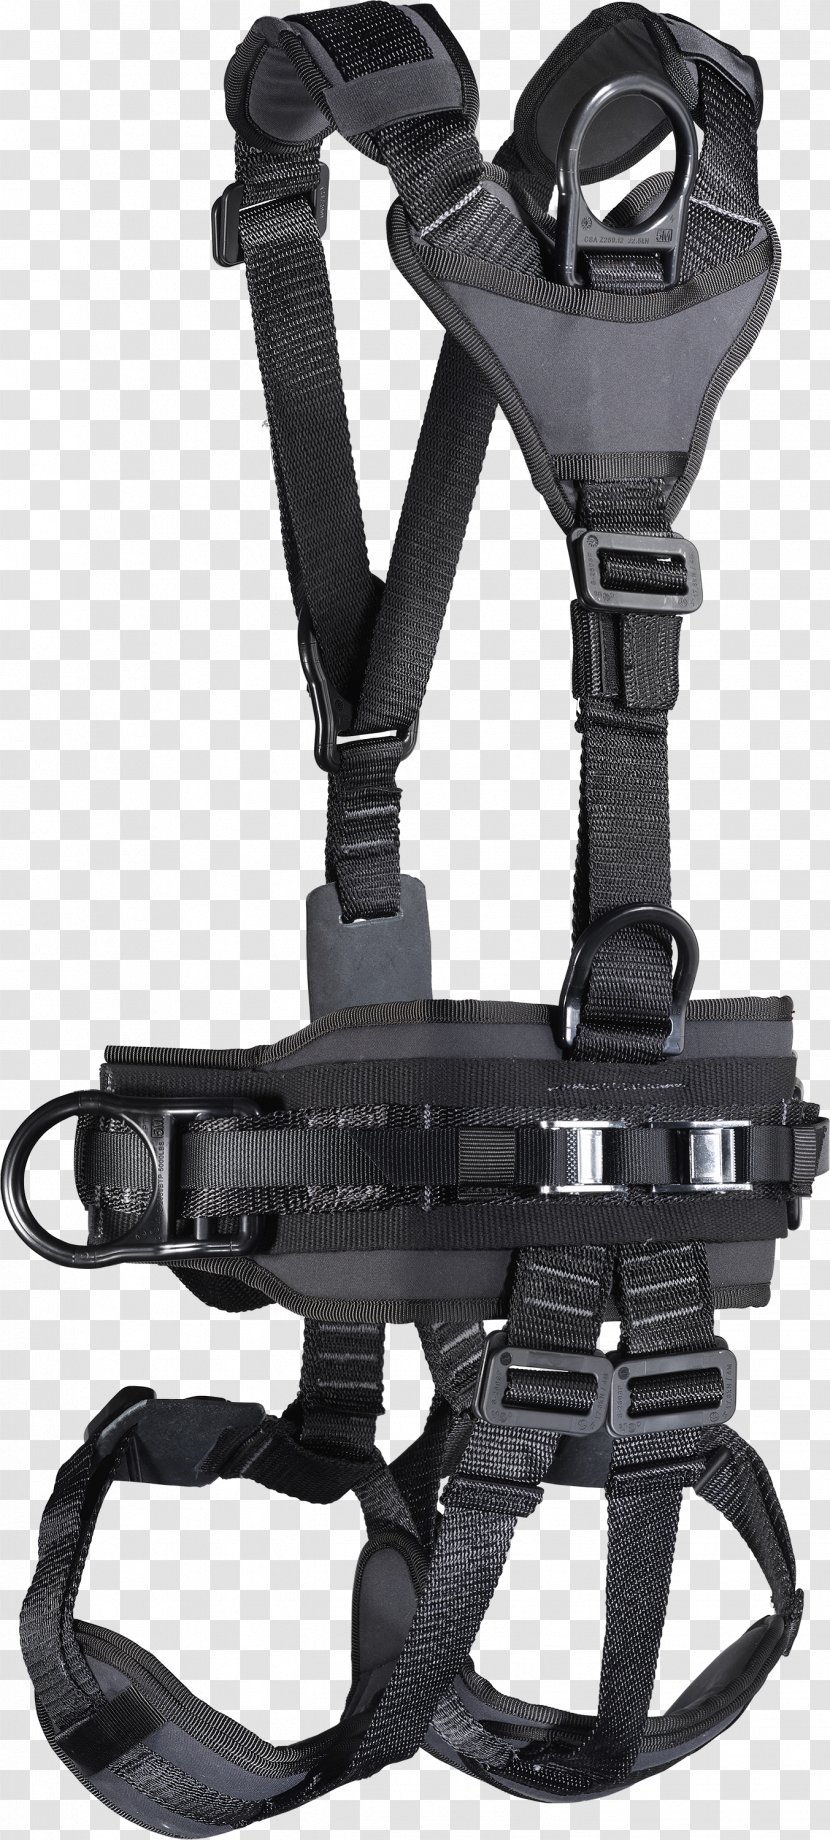 Climbing Harnesses Fall Protection Personal Protective Equipment Shoulder SKYLOTEC - Highline College Transparent PNG